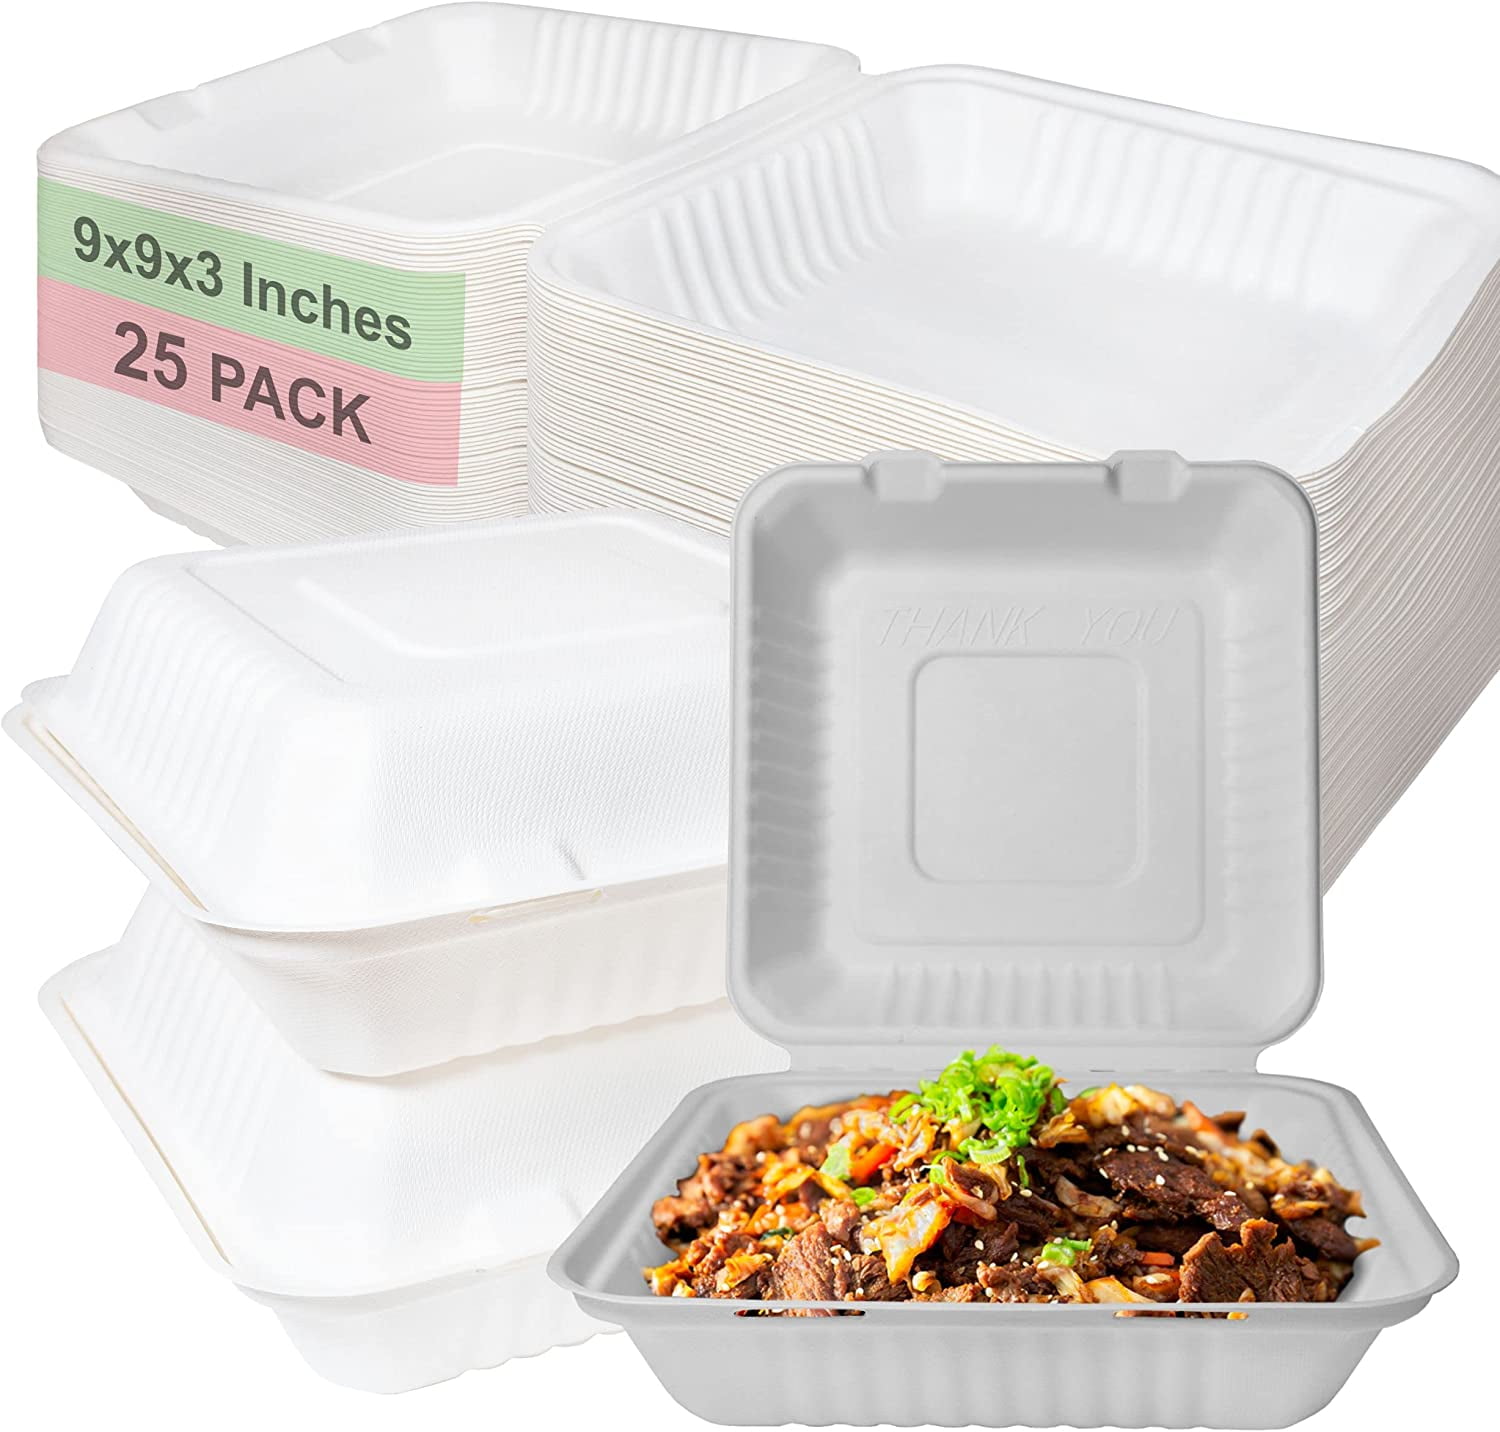 9 Creative Ways to Use Plastic Takeout Containers Around the House